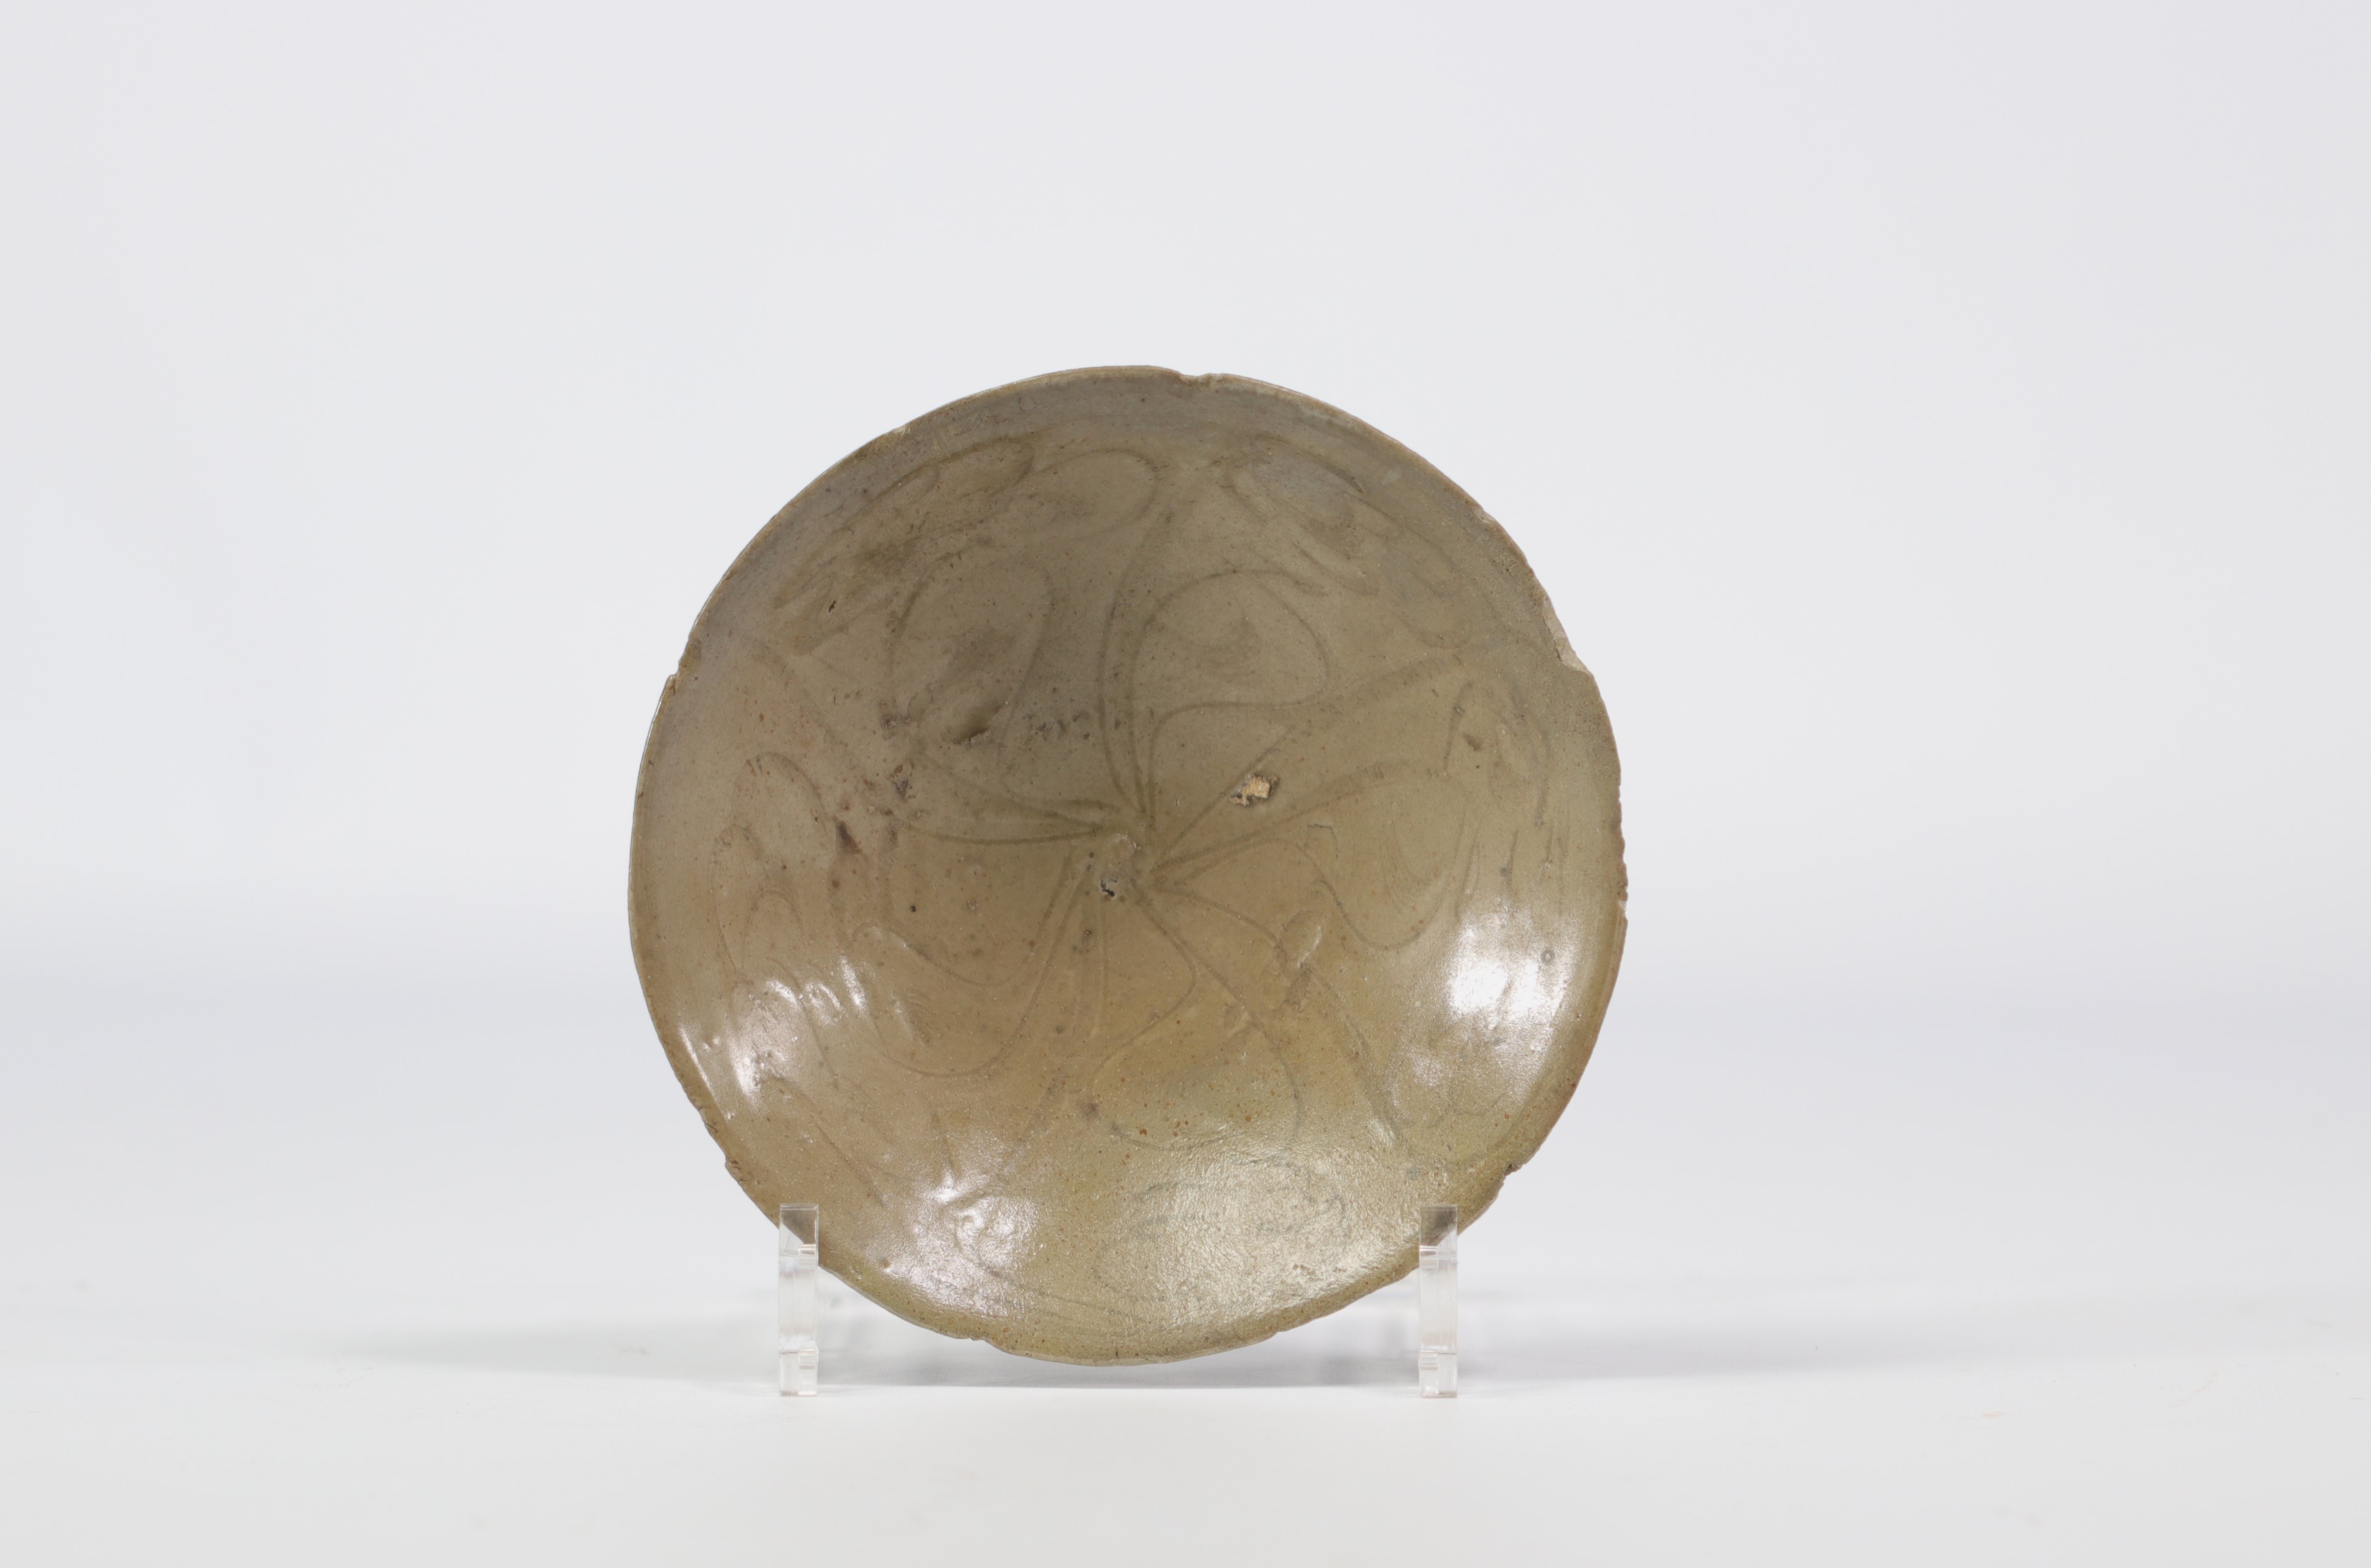 A celadon bowl with incised decoration, China, Song Dynasty